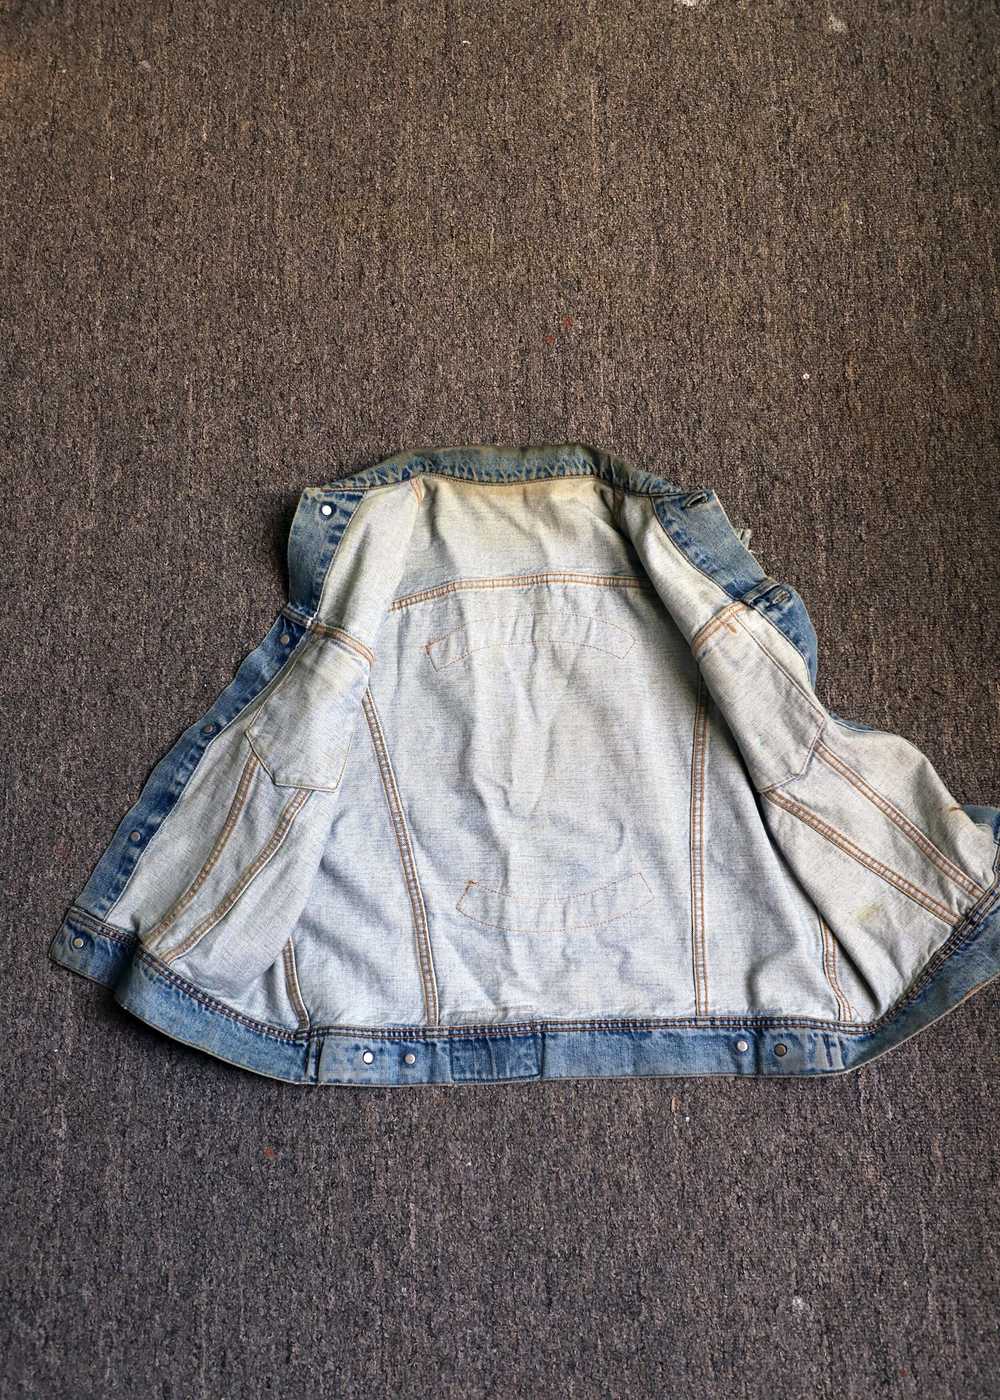 Thrifted Cut-off Jean Jacket - image 2